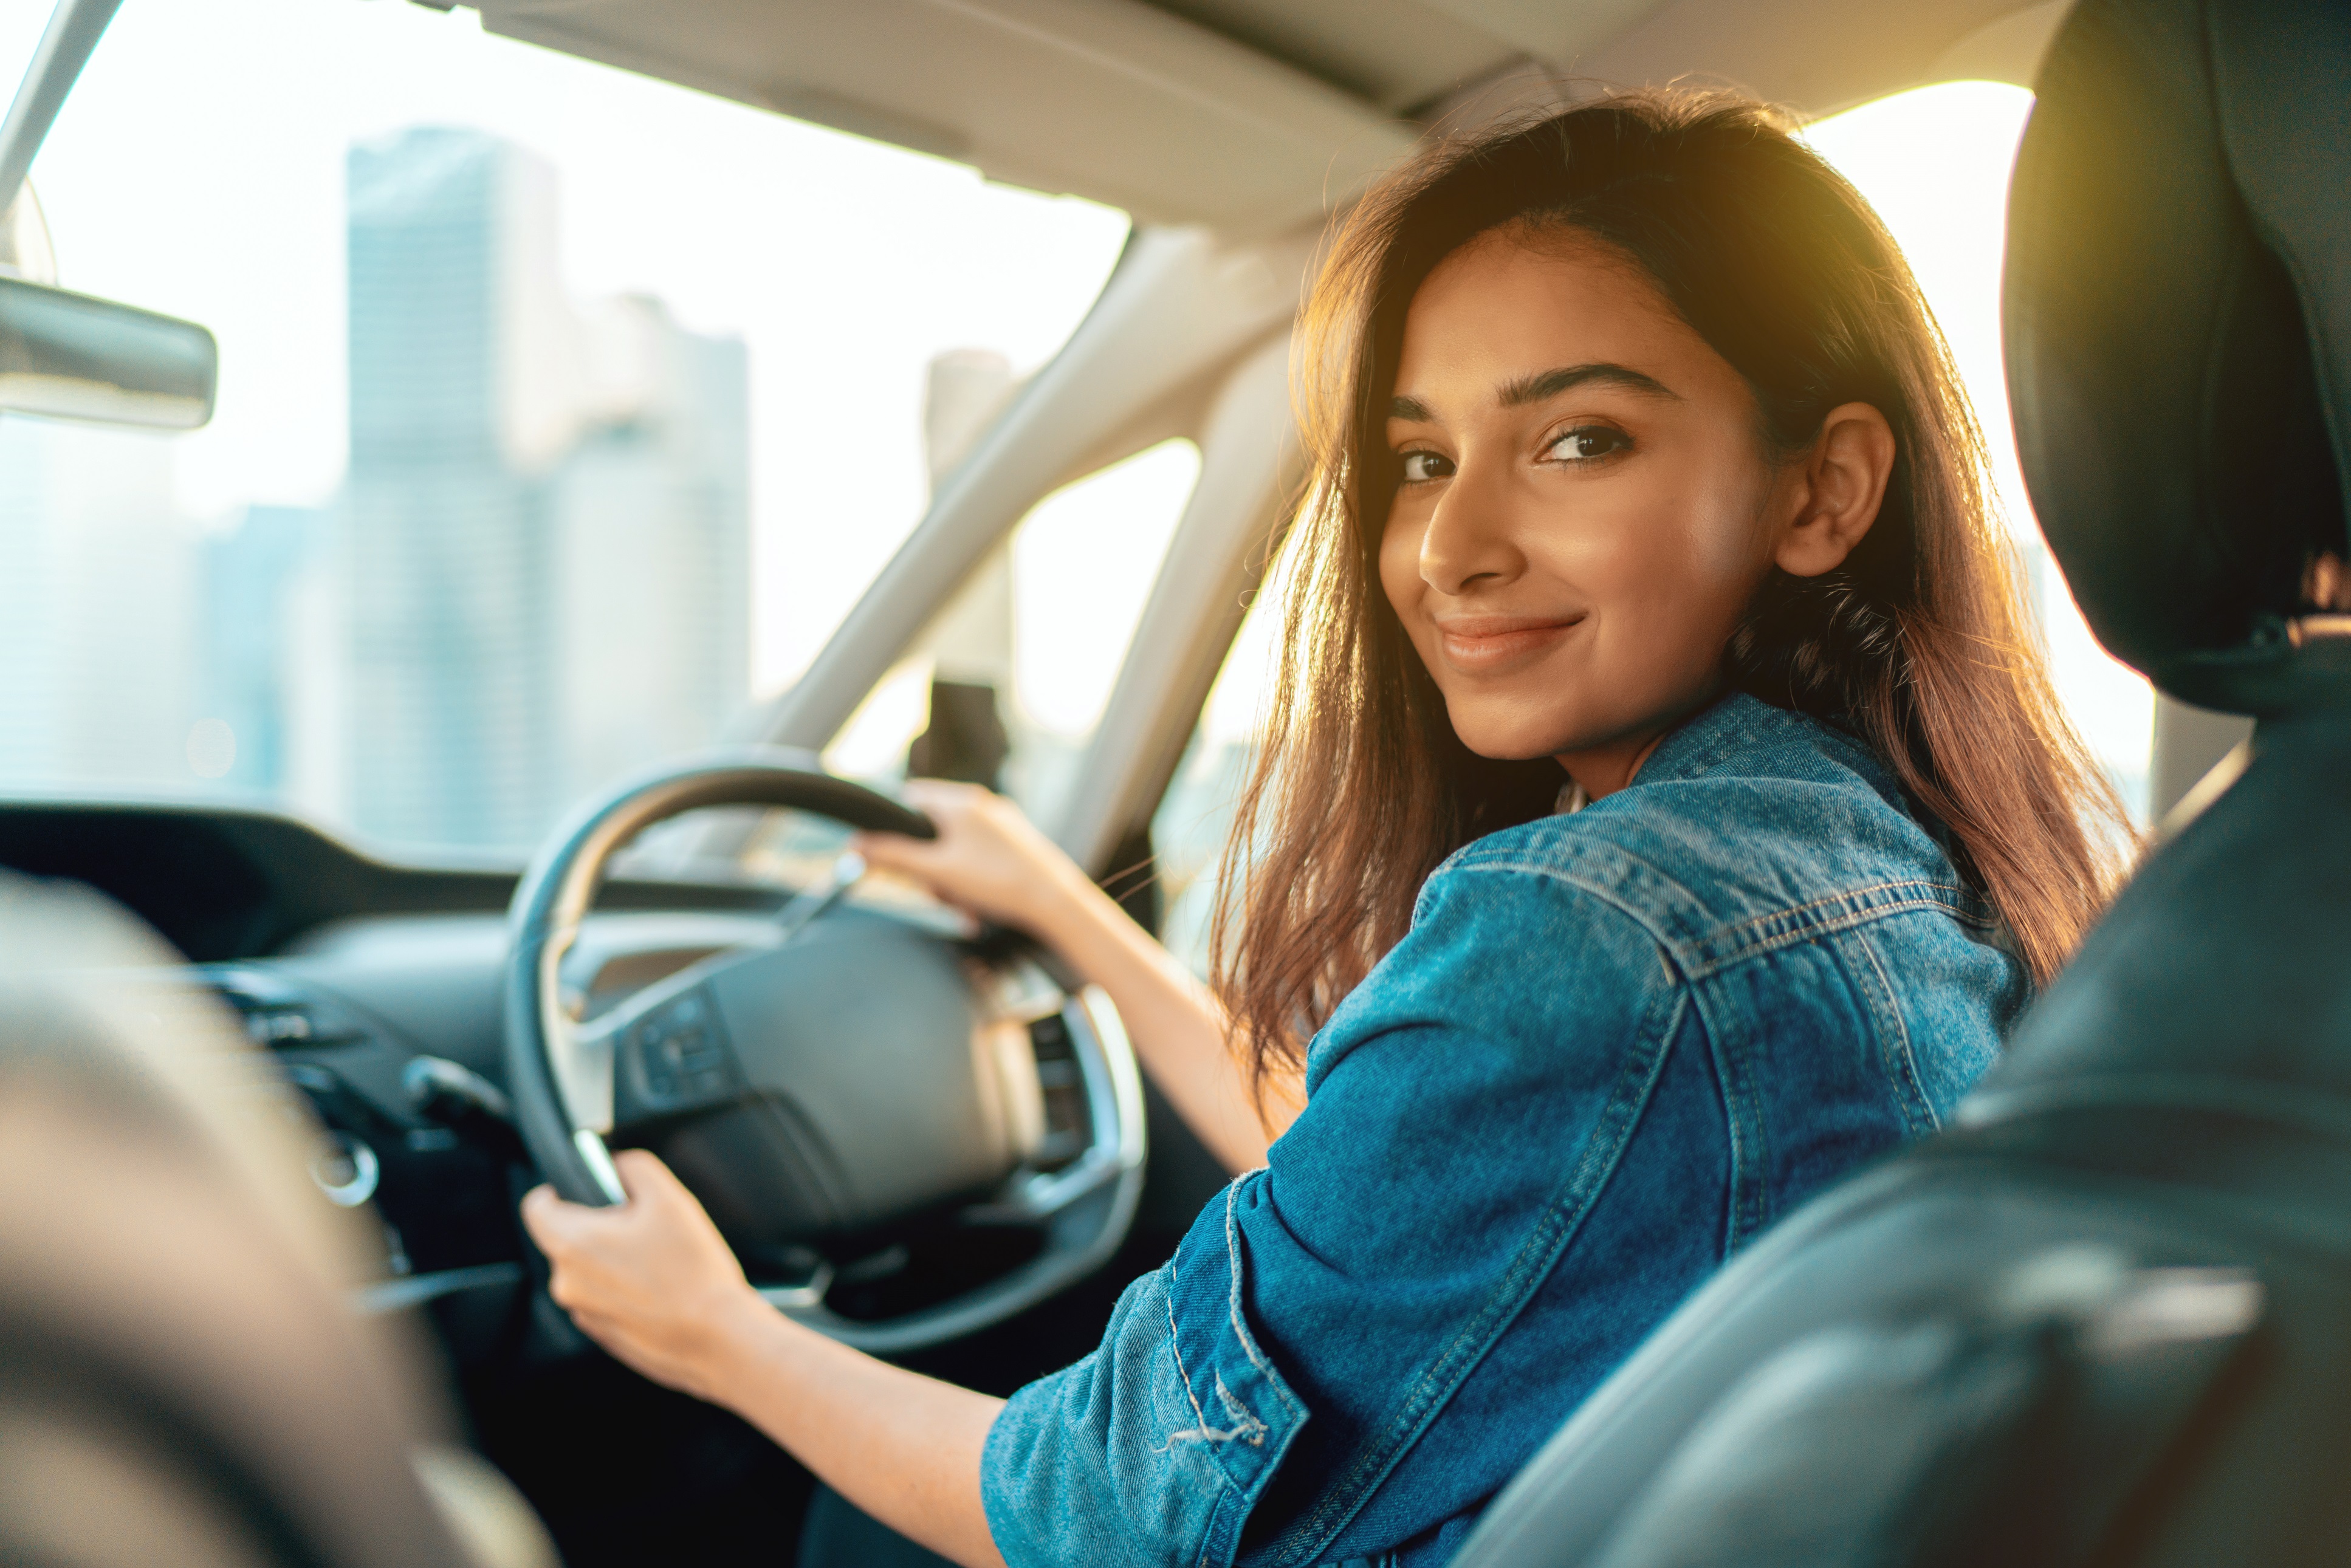 Preparing to purchase a new vehicle is a major decision and can be overwhelming when it comes to understanding the financing aspect.